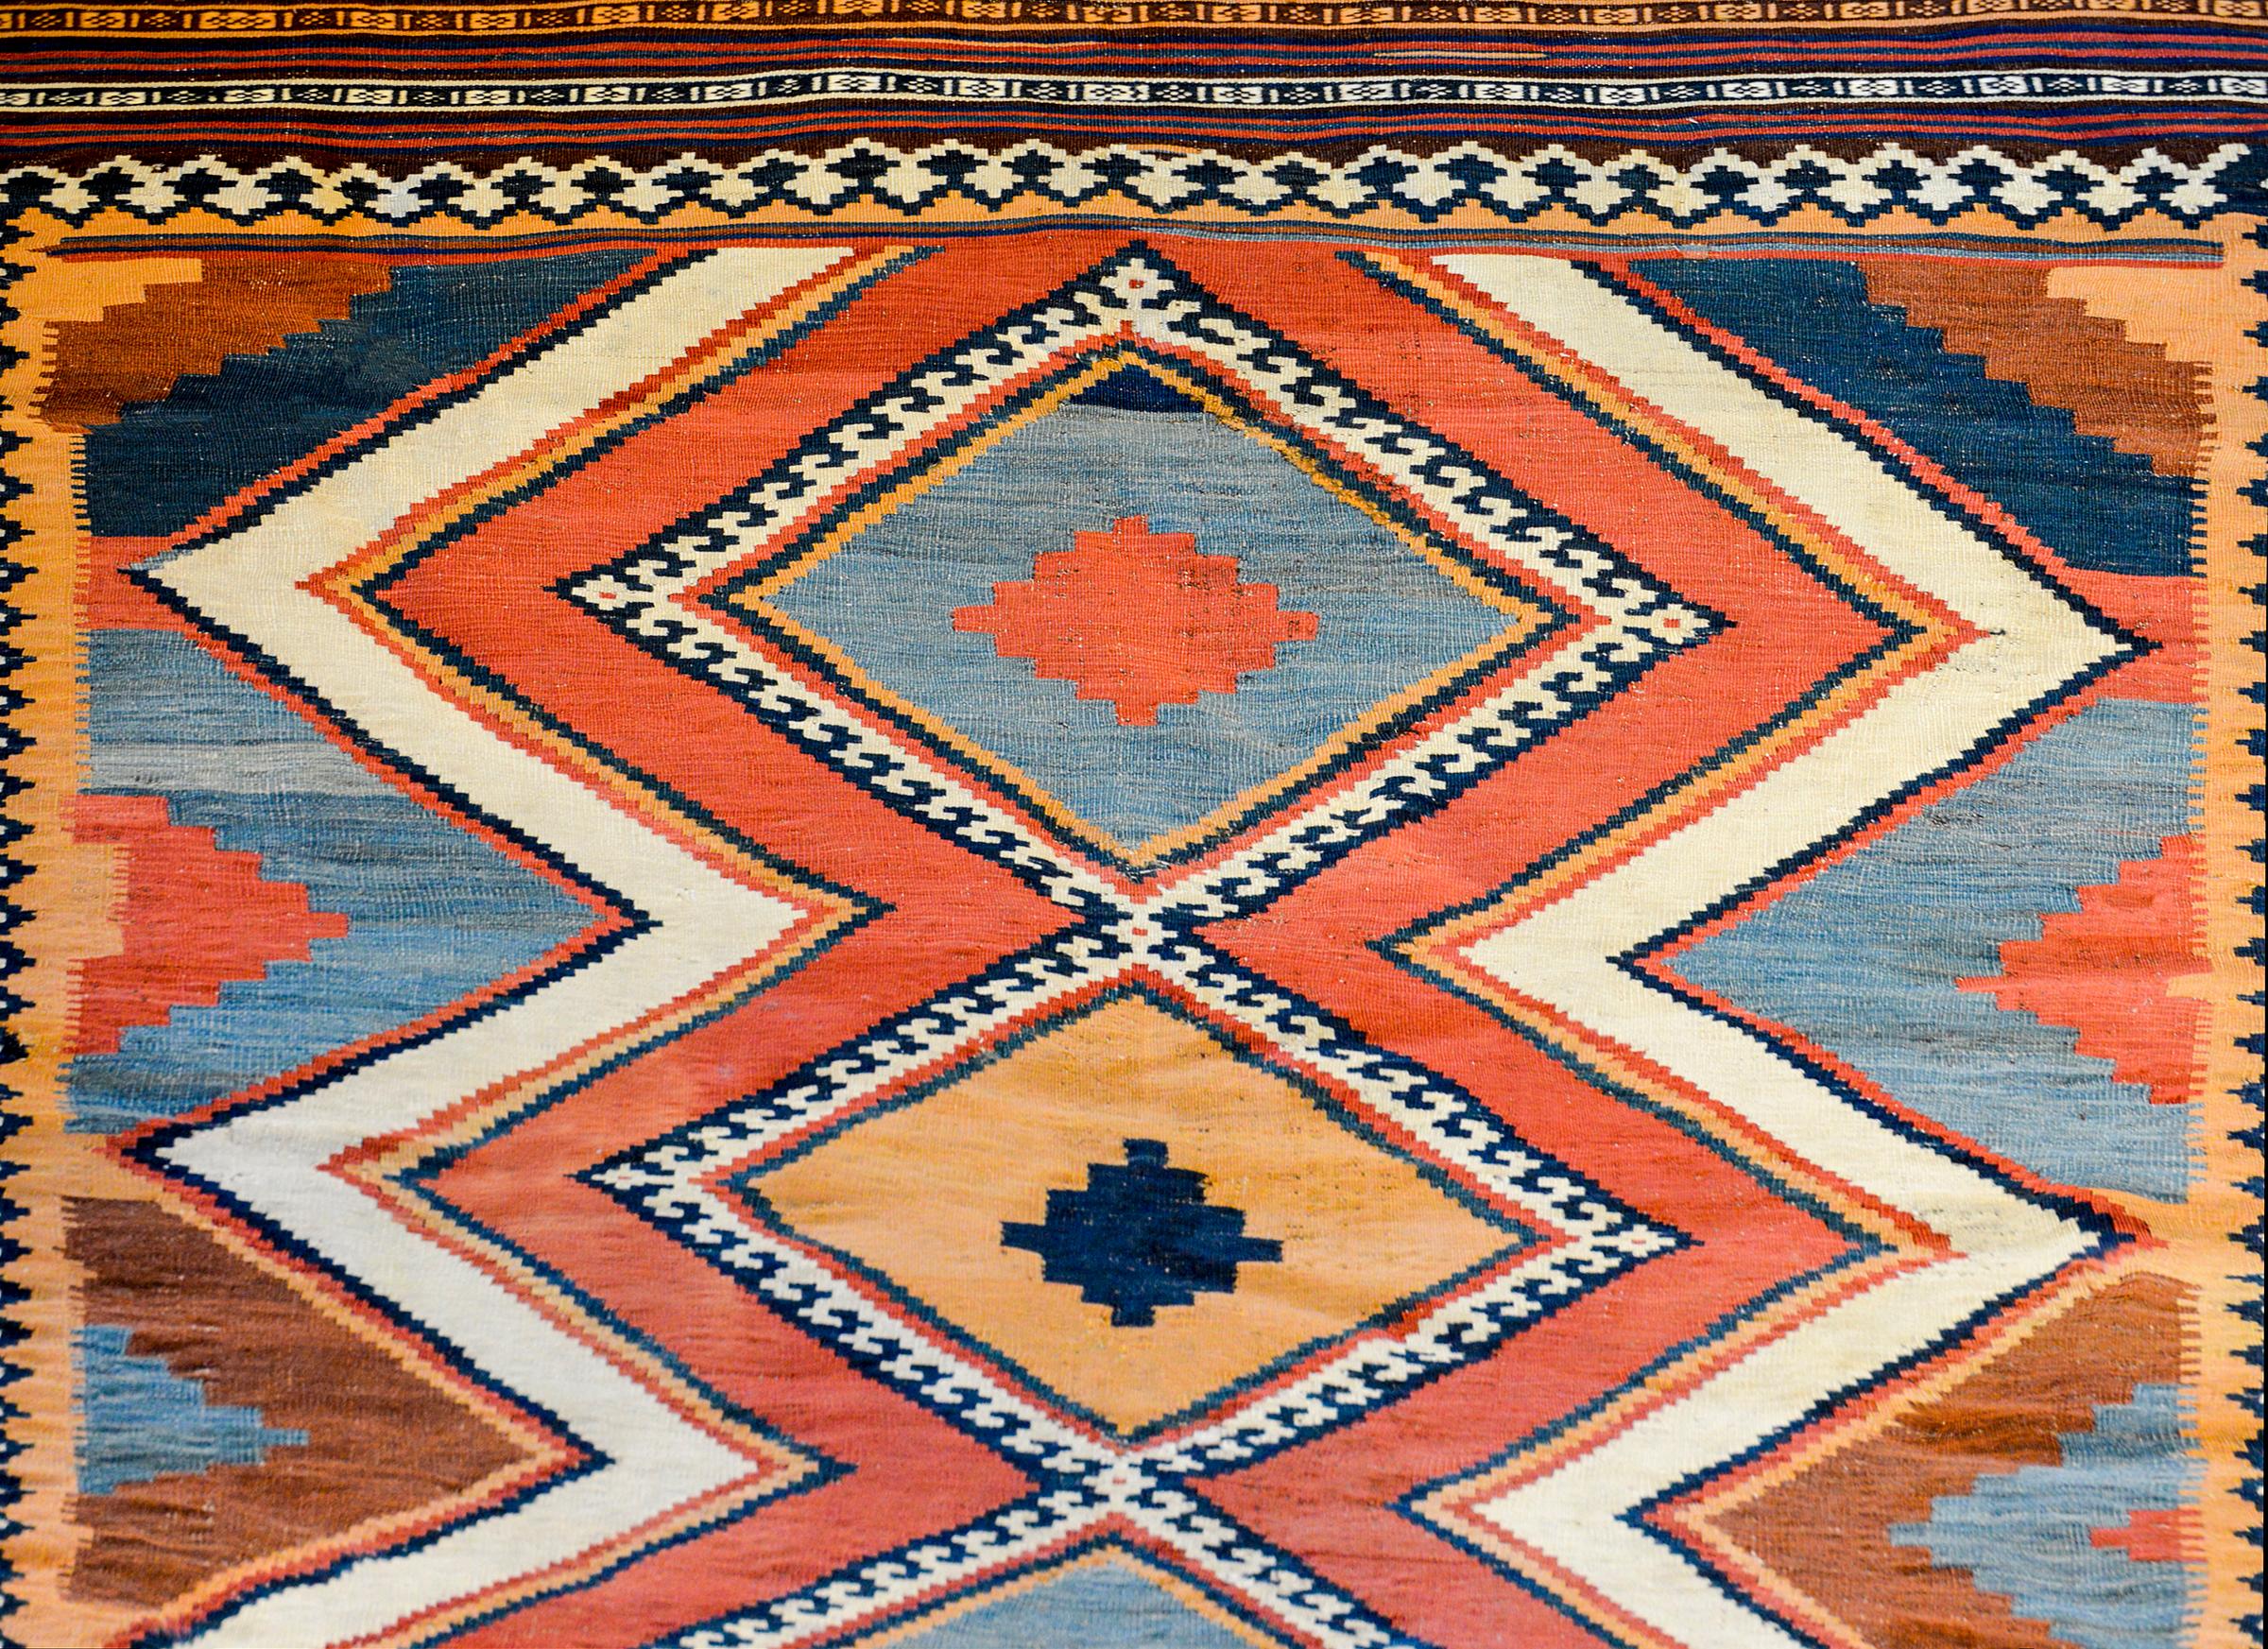 Early 20th Century Shiraz Kilim Rug In Good Condition For Sale In Chicago, IL